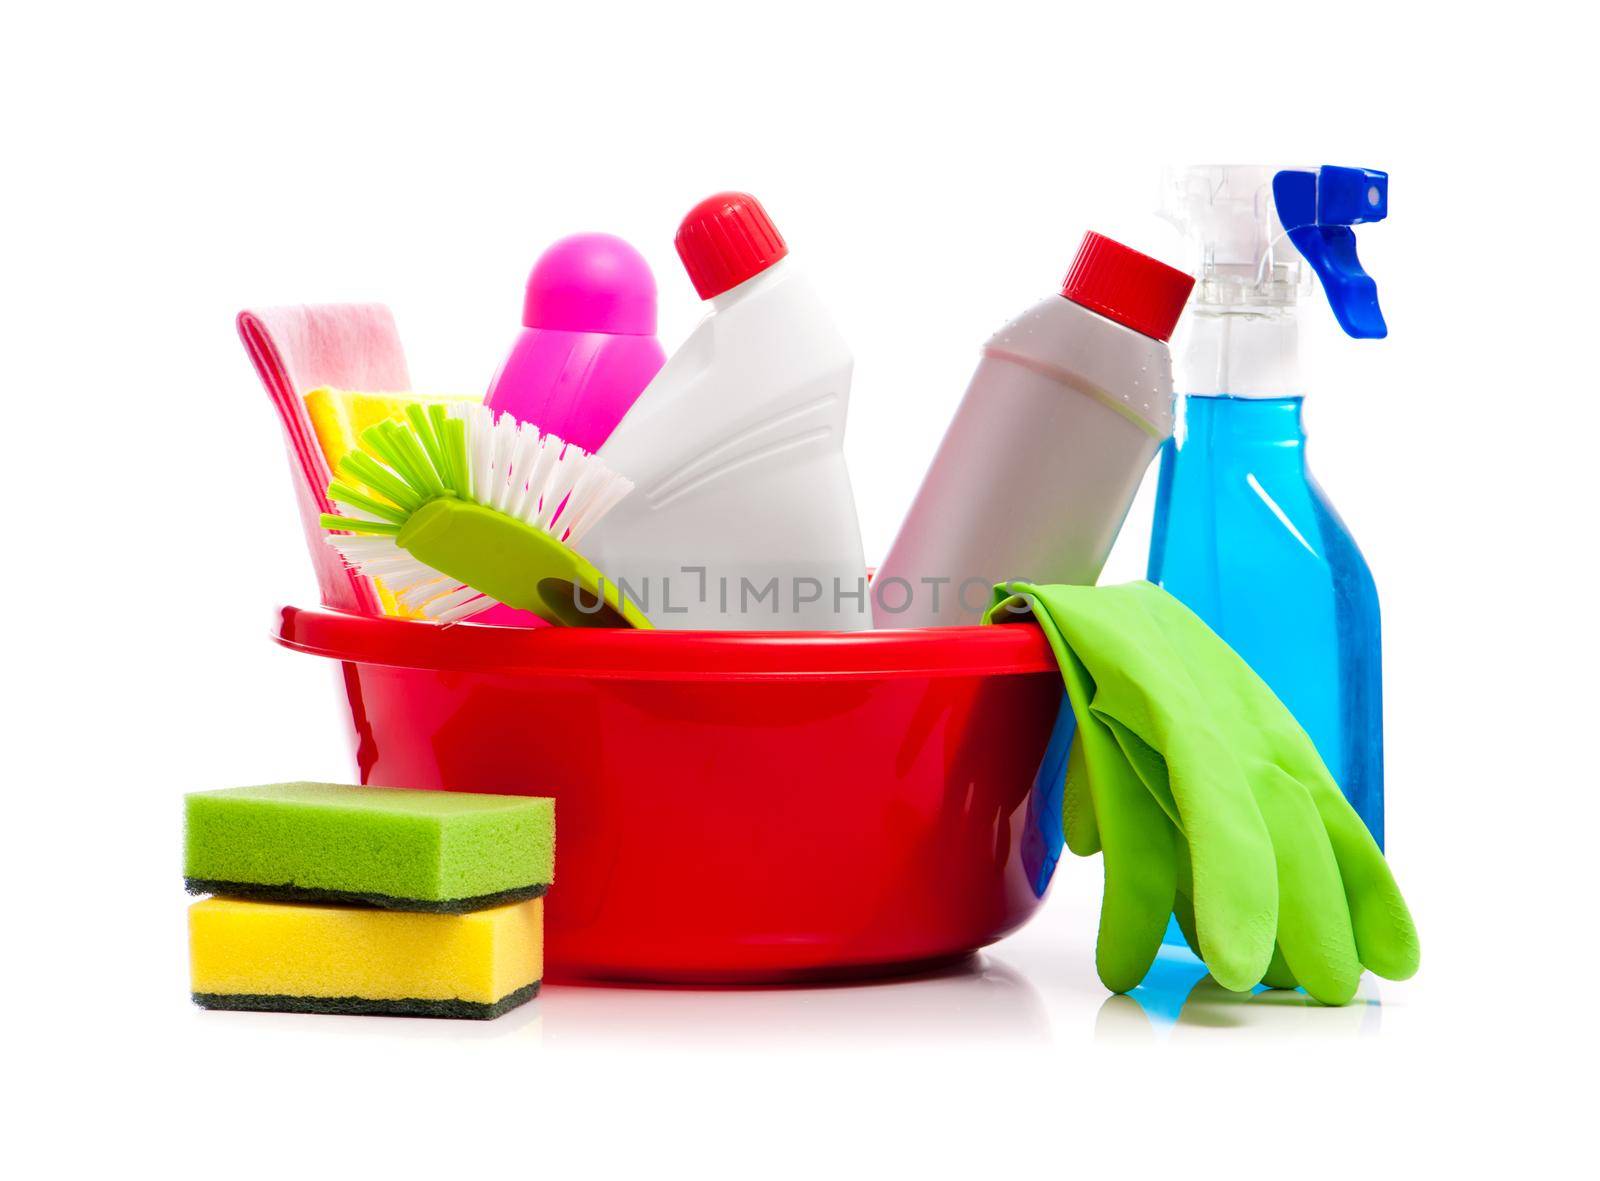 box of cleaning supplies by tan4ikk1